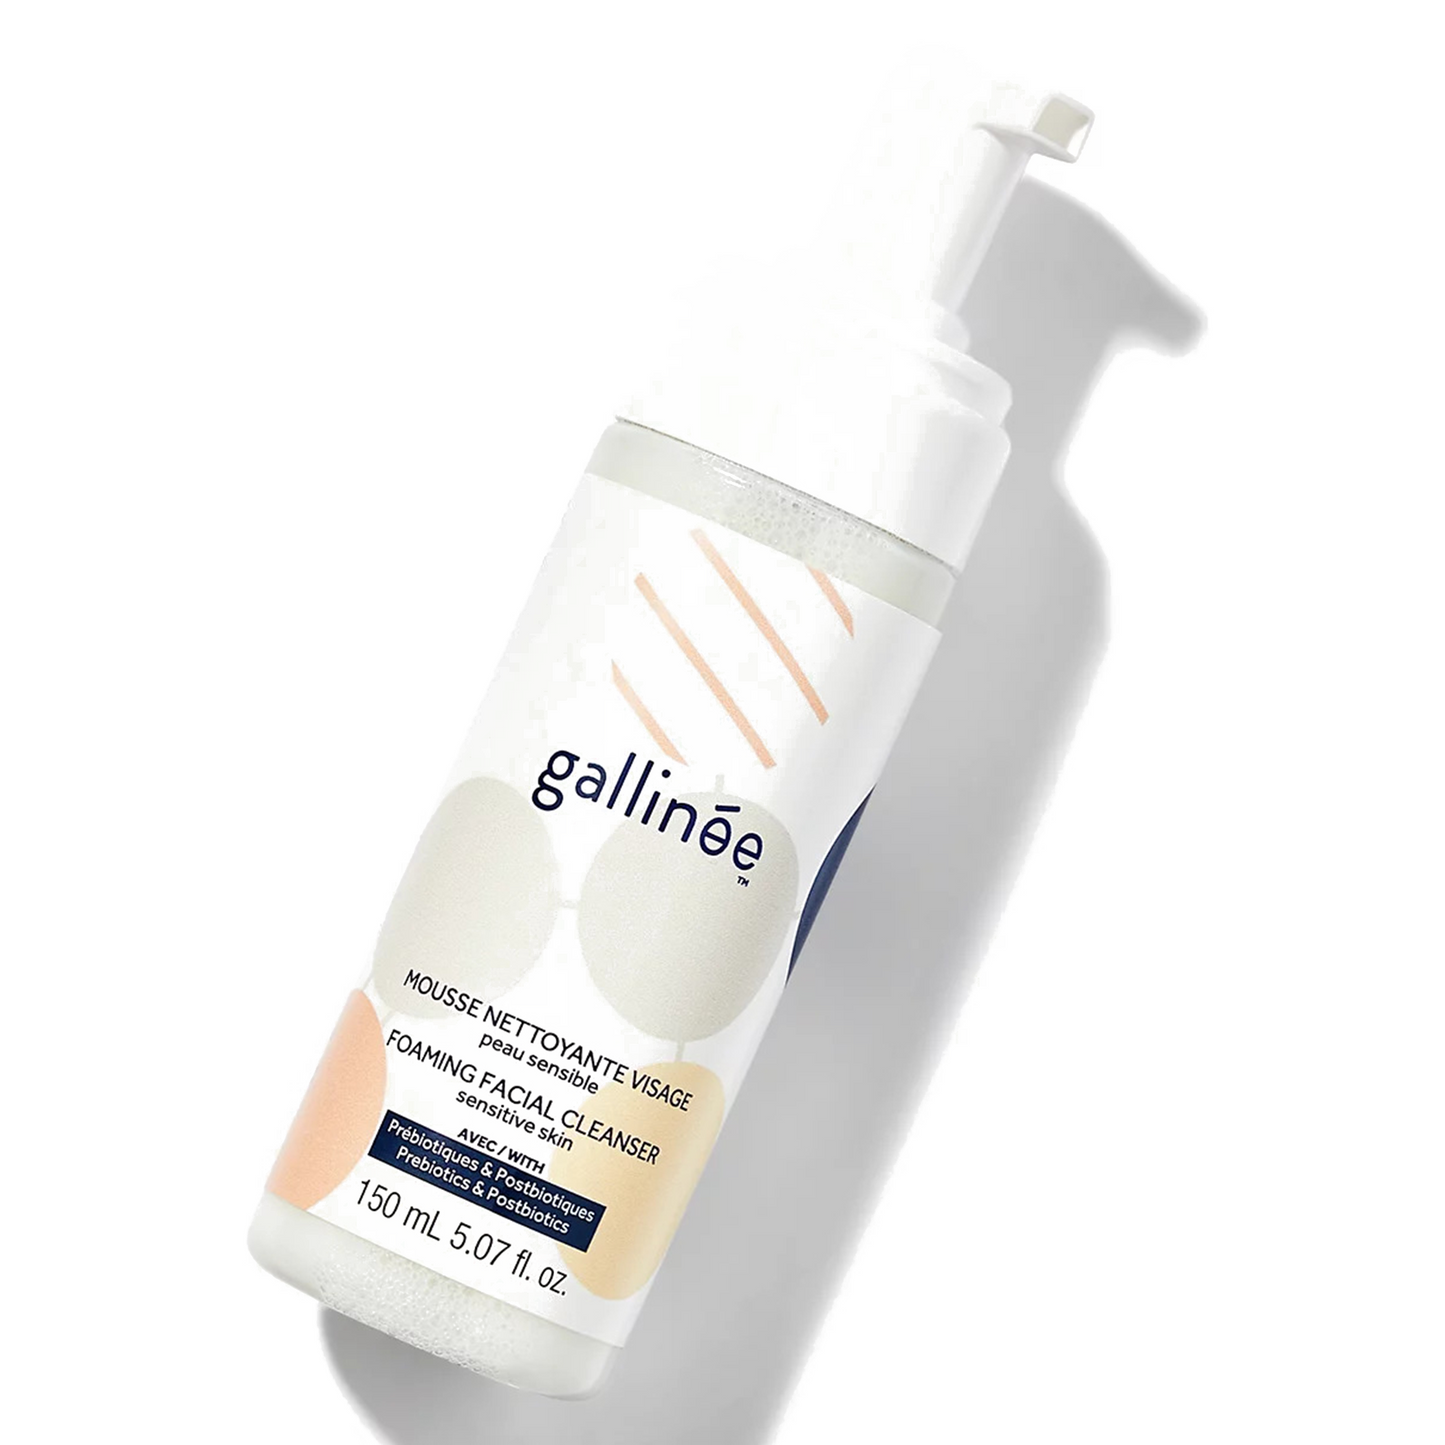 Gallinee Prebiotic Facial Cleanser: Ultra-gentle facial wash – the perfect daily cleanser! Your skin is left fresh, clear & healthy. Combination of prebiotics & lactic acid to support your skin’s good bacteria. Suitable for all skin types, including sensitive or eczema-prone skin.